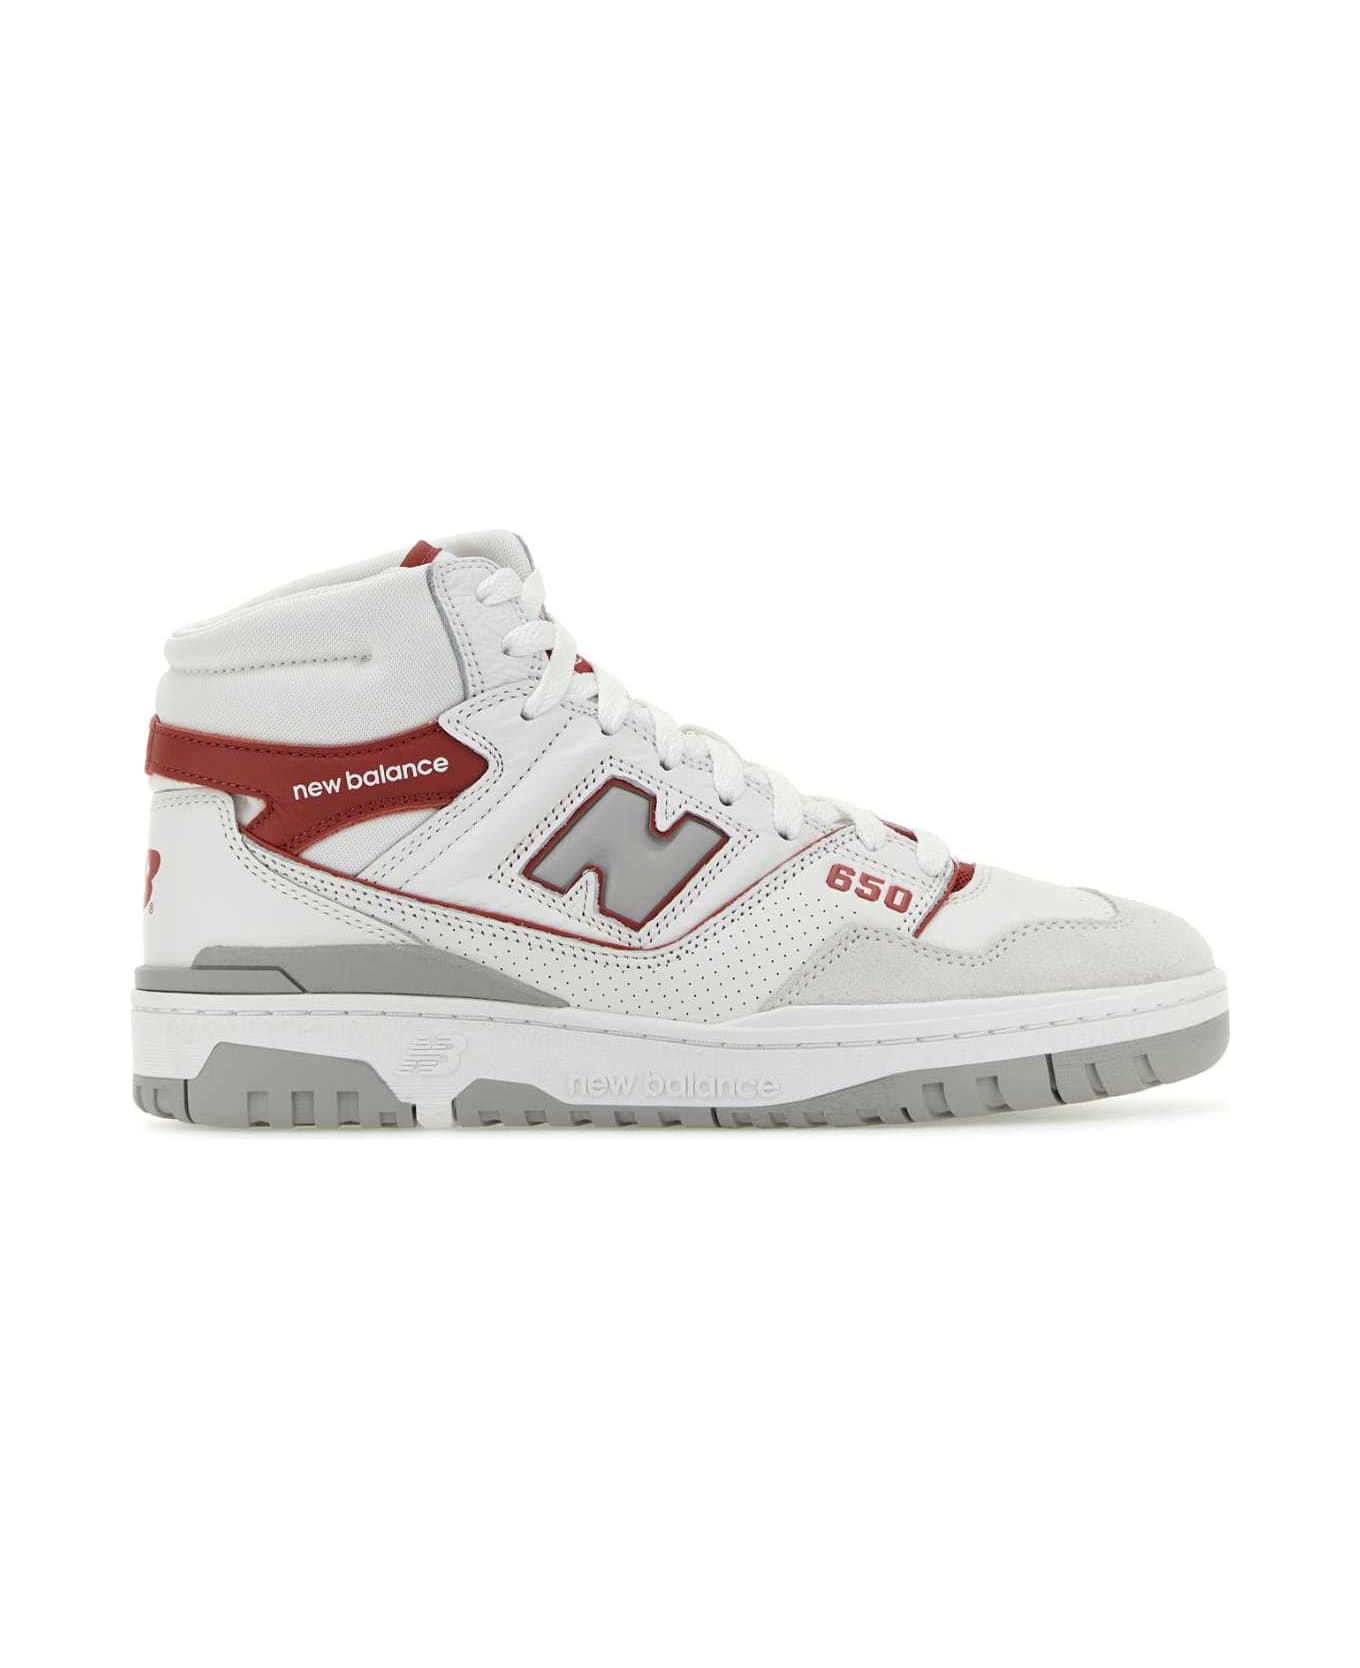 New Balance Multicolor Leather And Suede 650 Sneakers - WHITE スニーカー